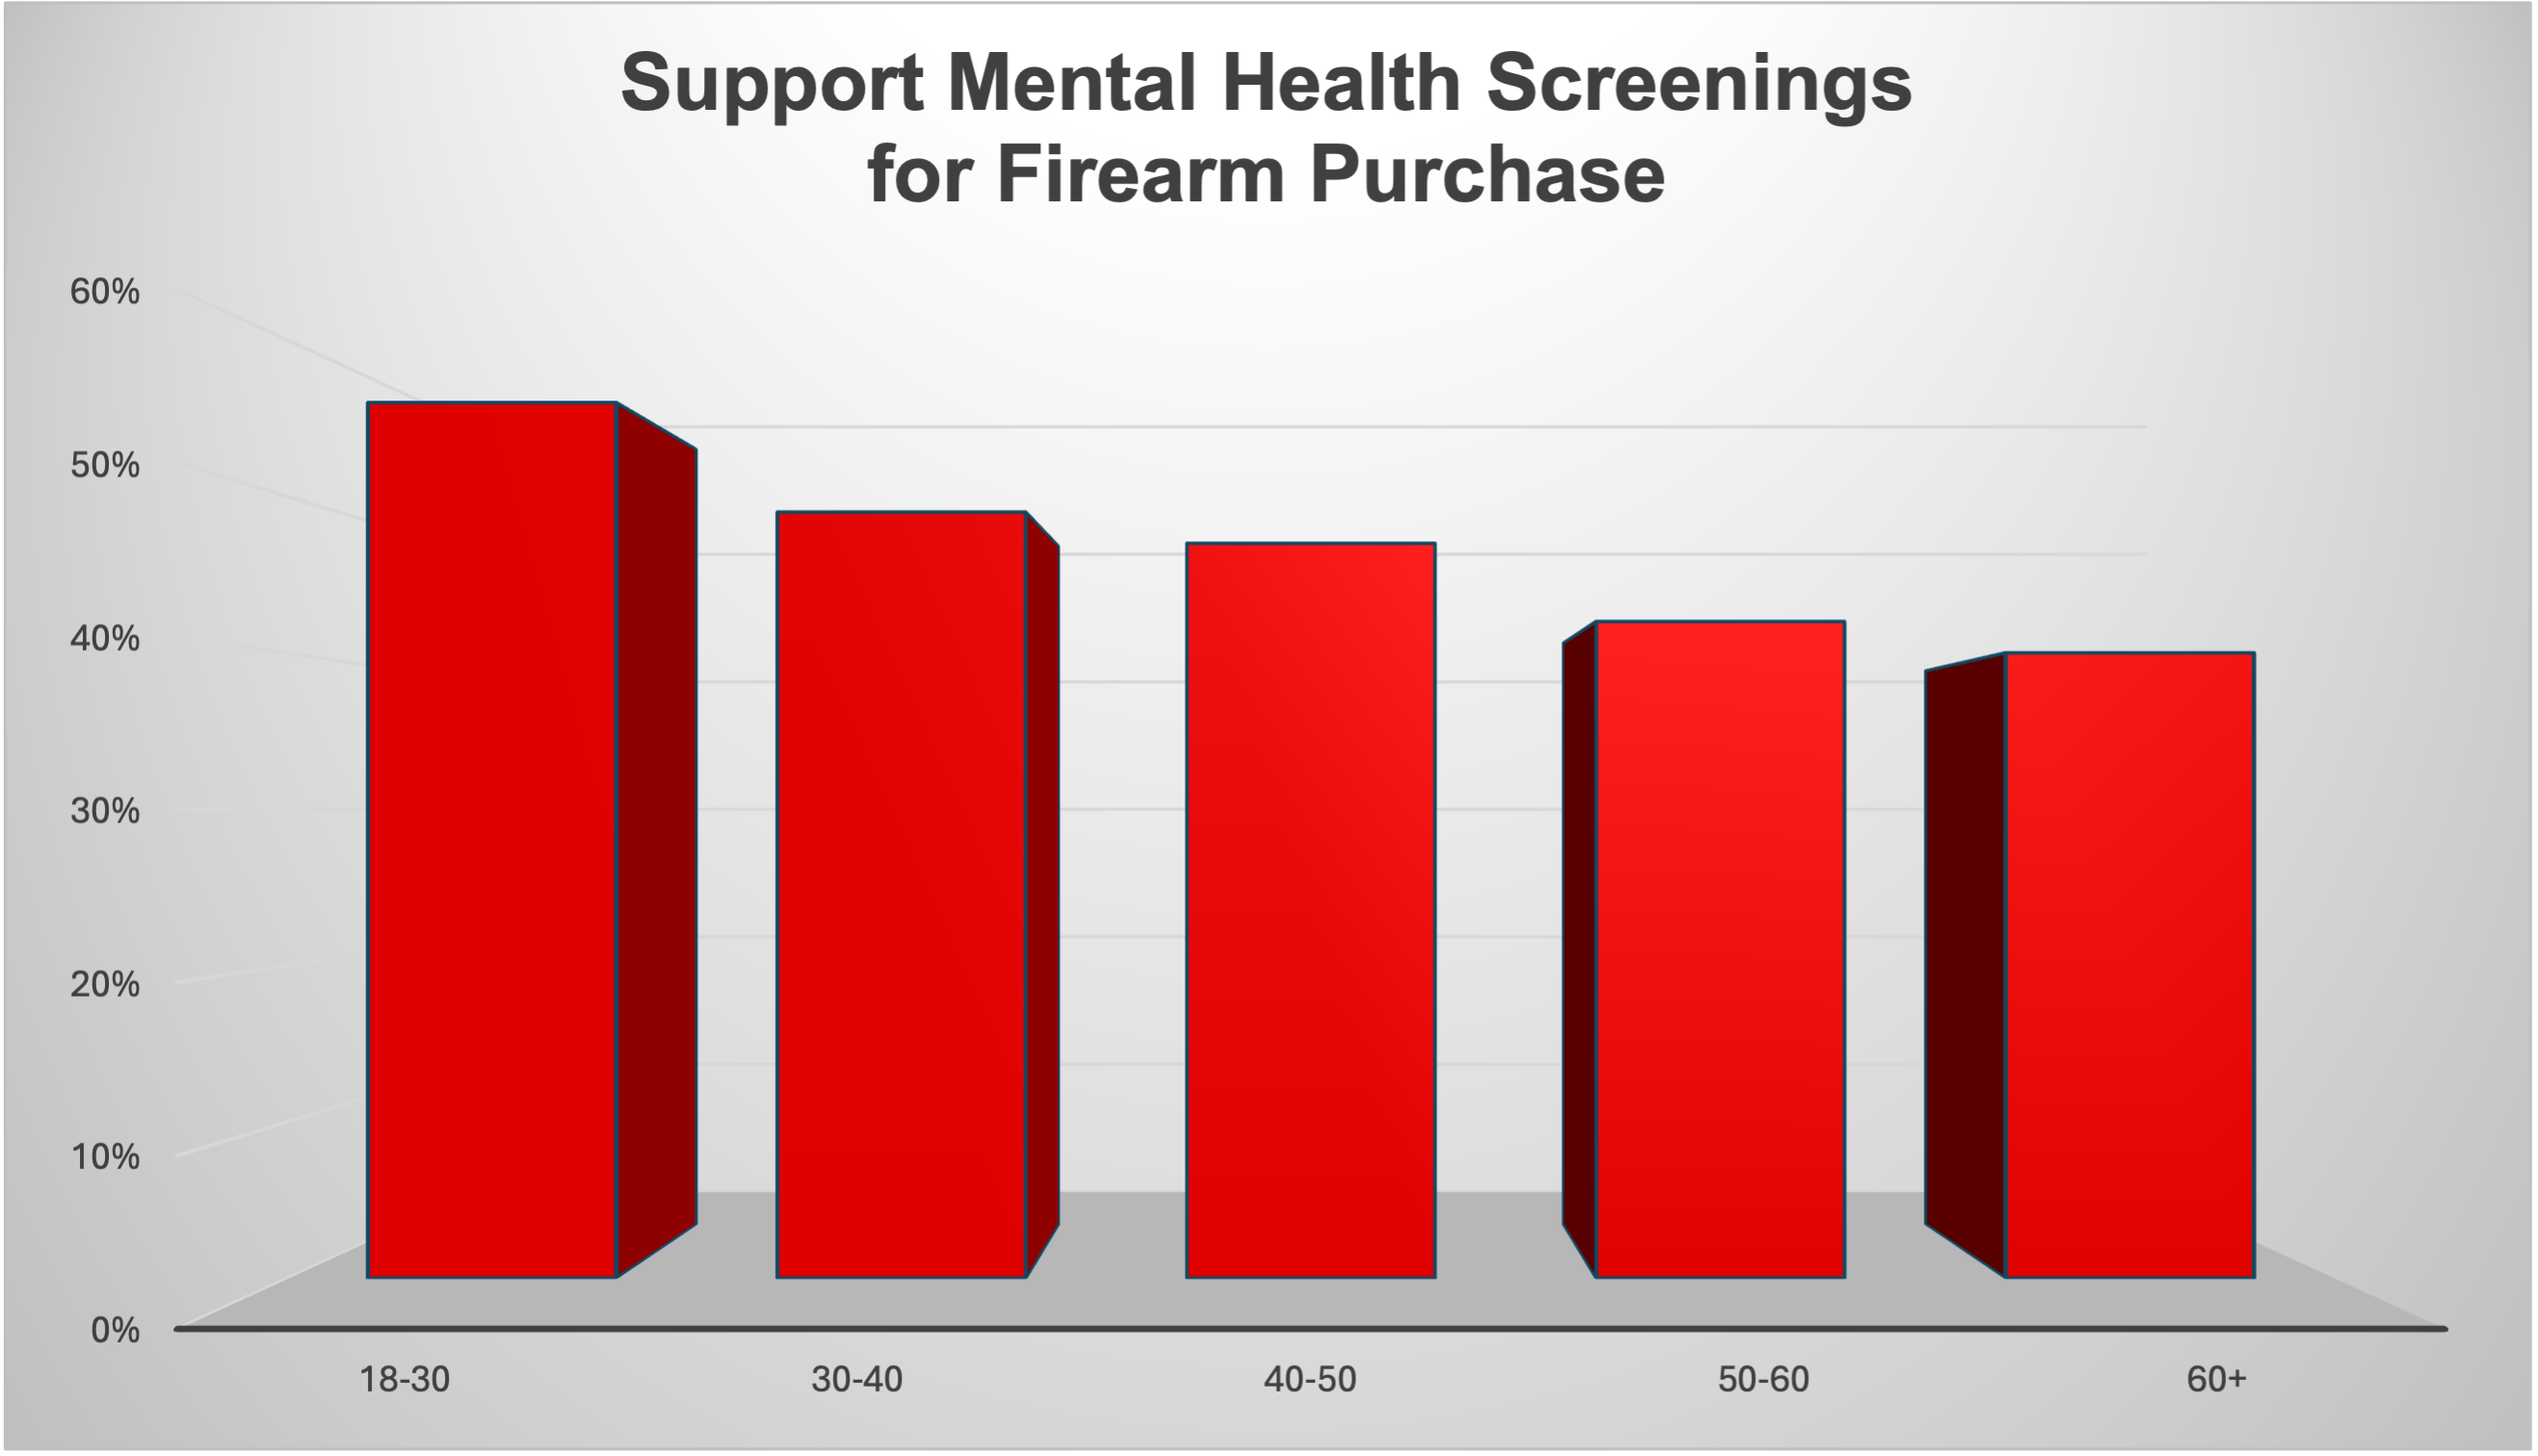 Support for mental health screenings for firearm purchase based on respondent age